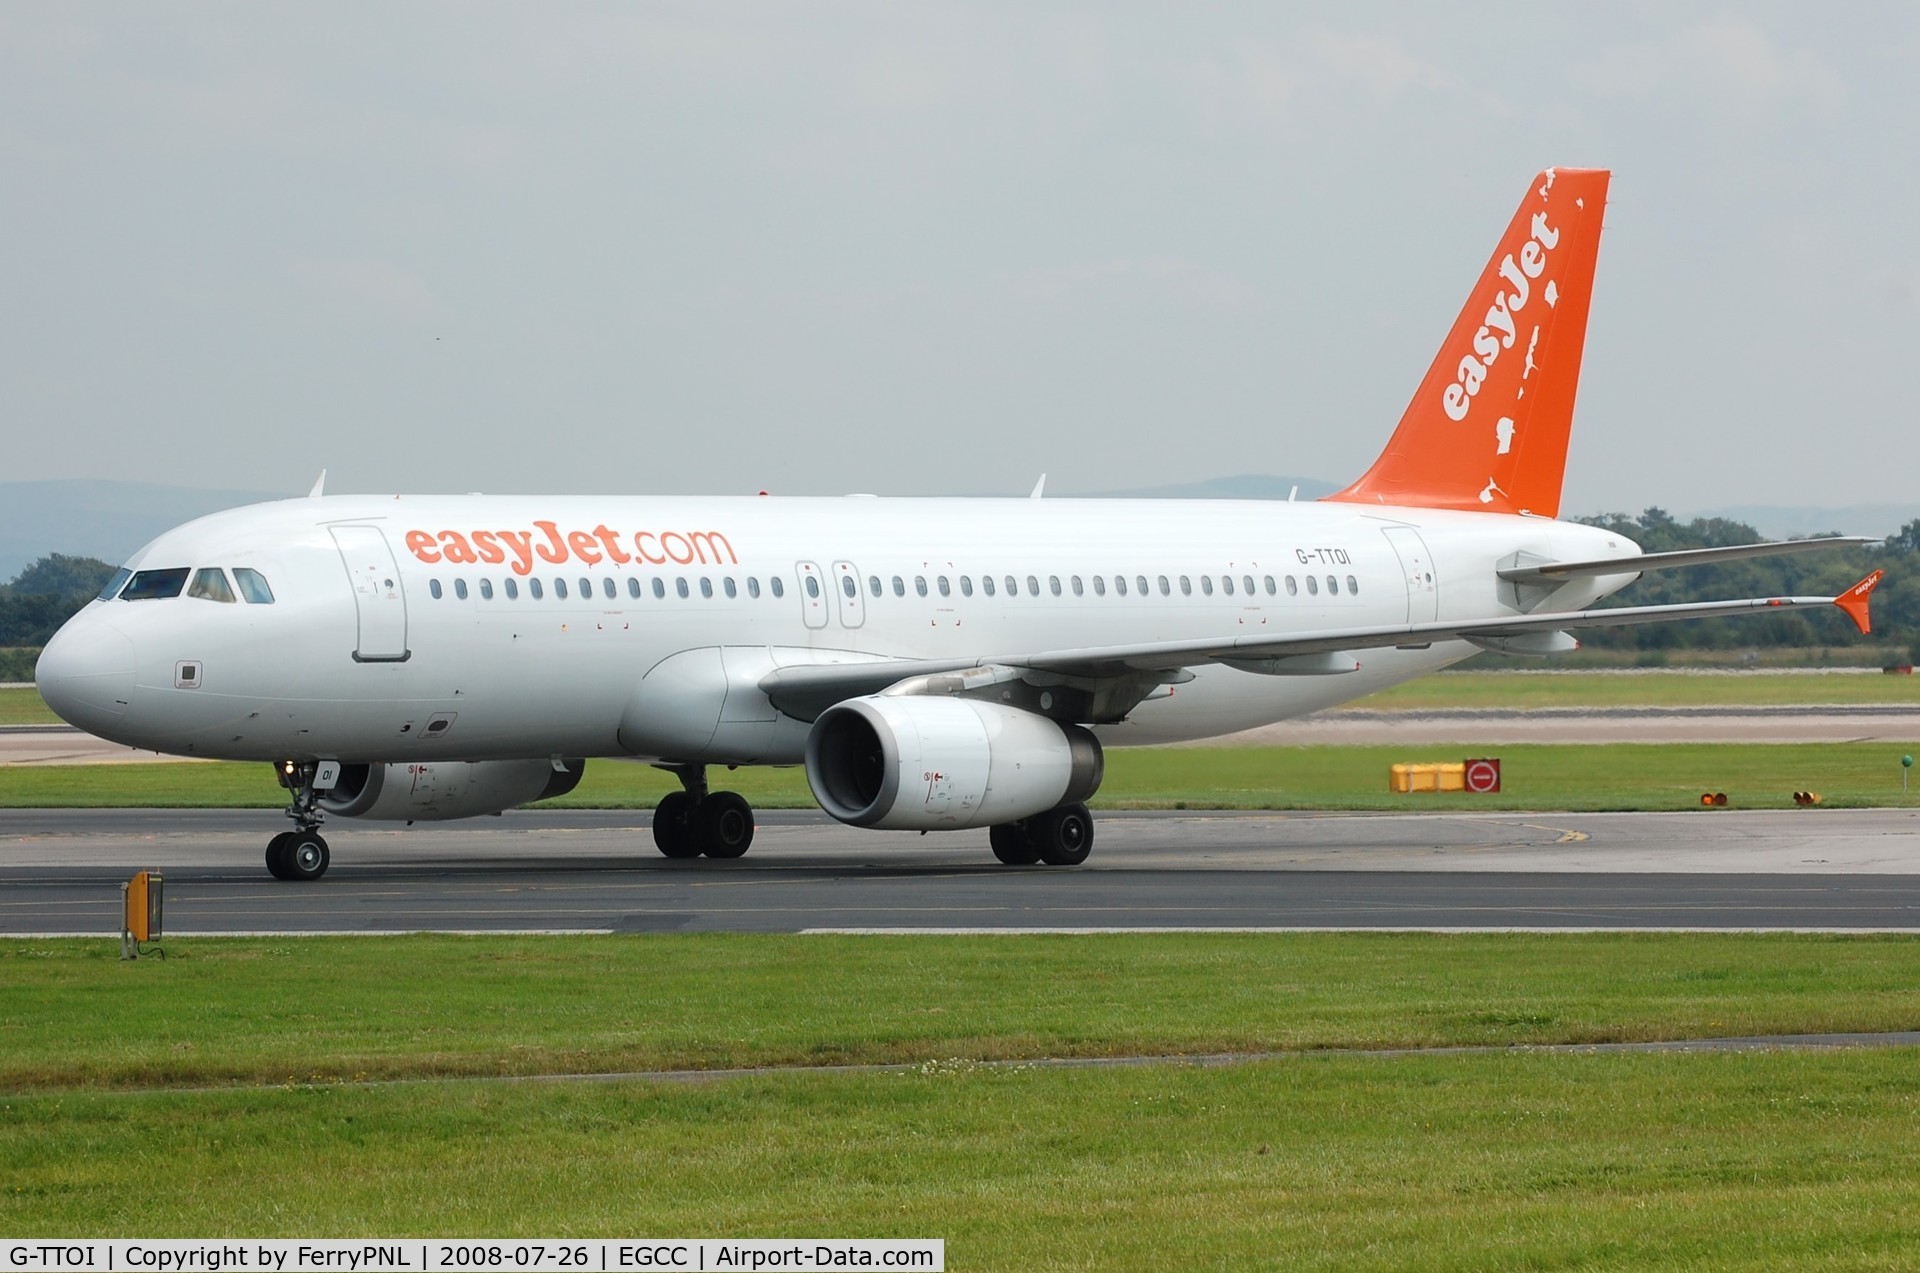 G-TTOI, 2003 Airbus A320-232 C/N 2137, Former GB Airways A320 now operating for Easyjet